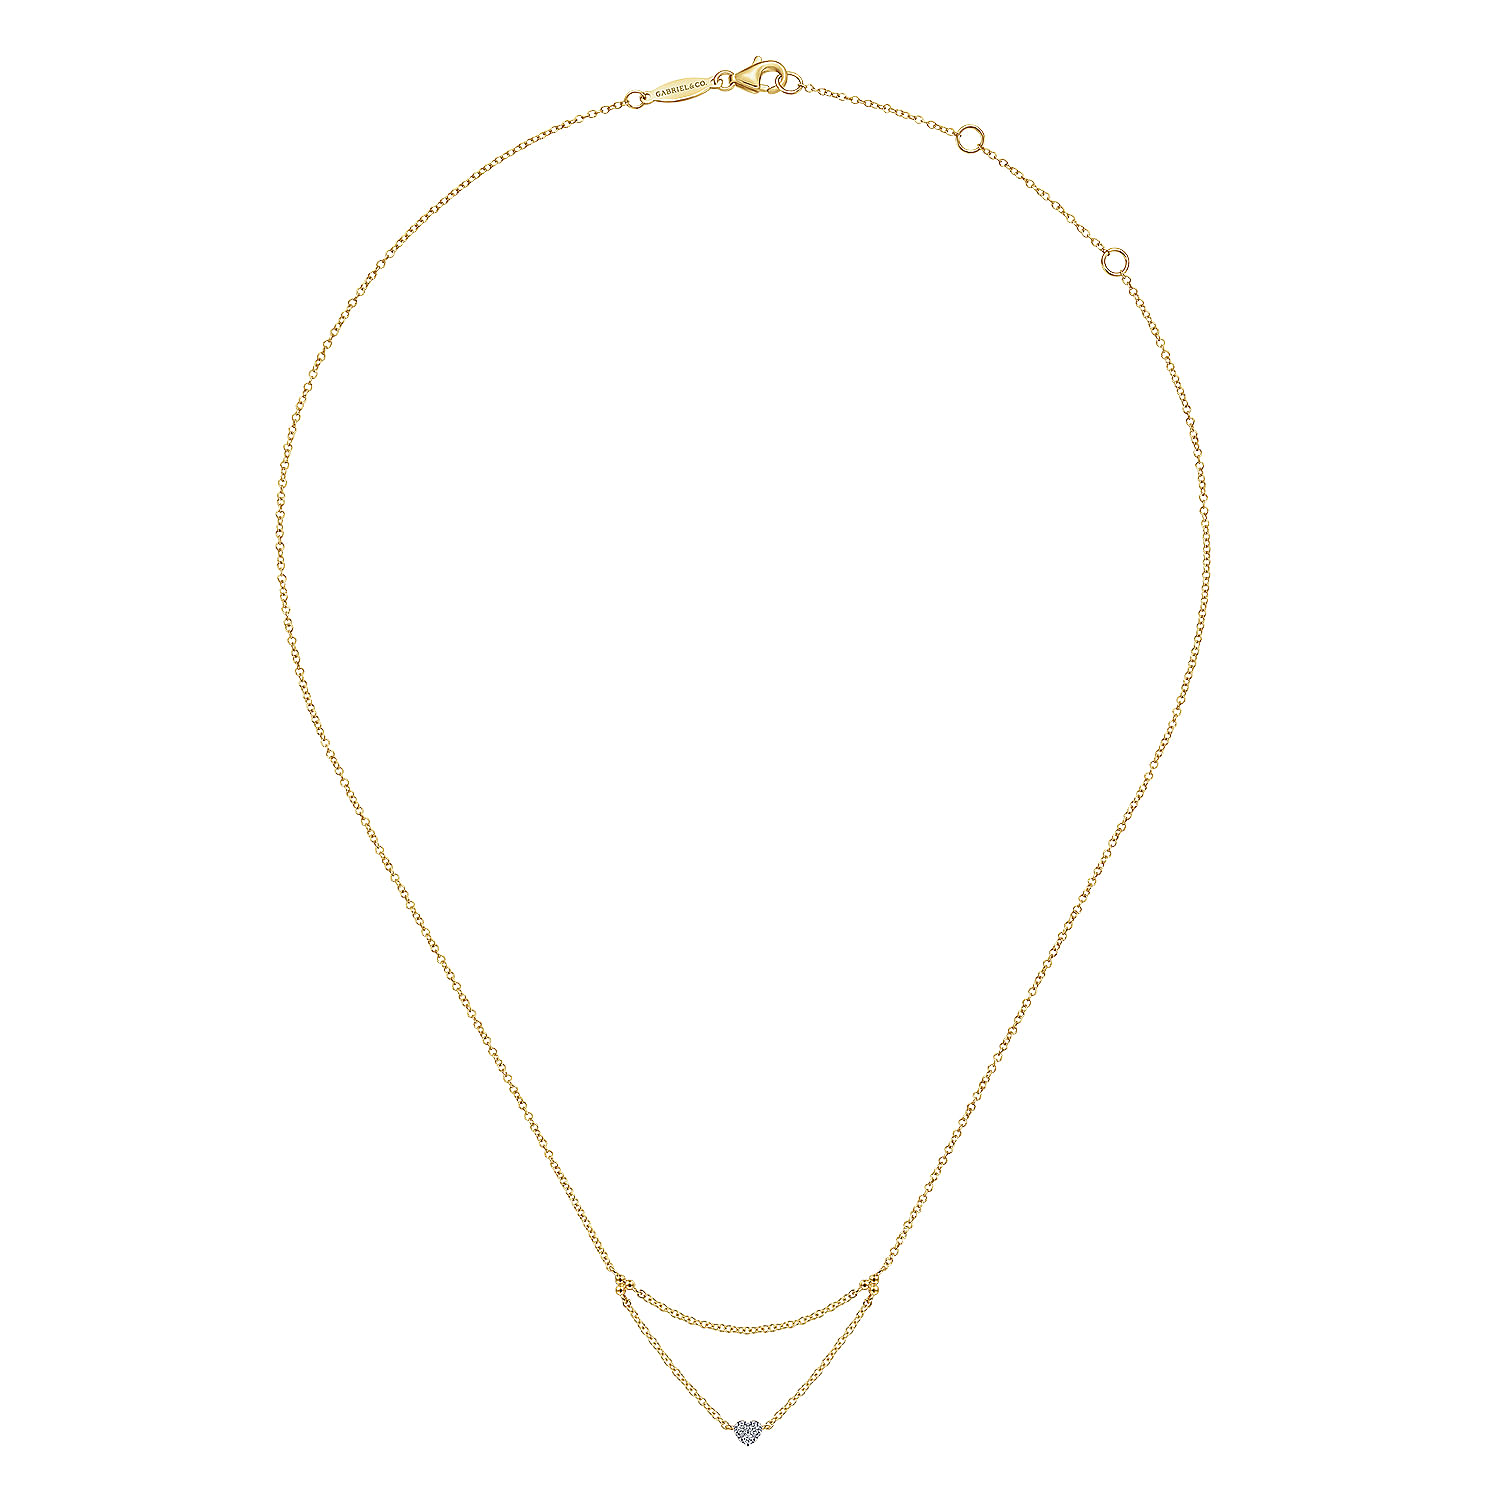 14K Yellow Gold Triangular Chain Necklace with Pavé Diamond Heart